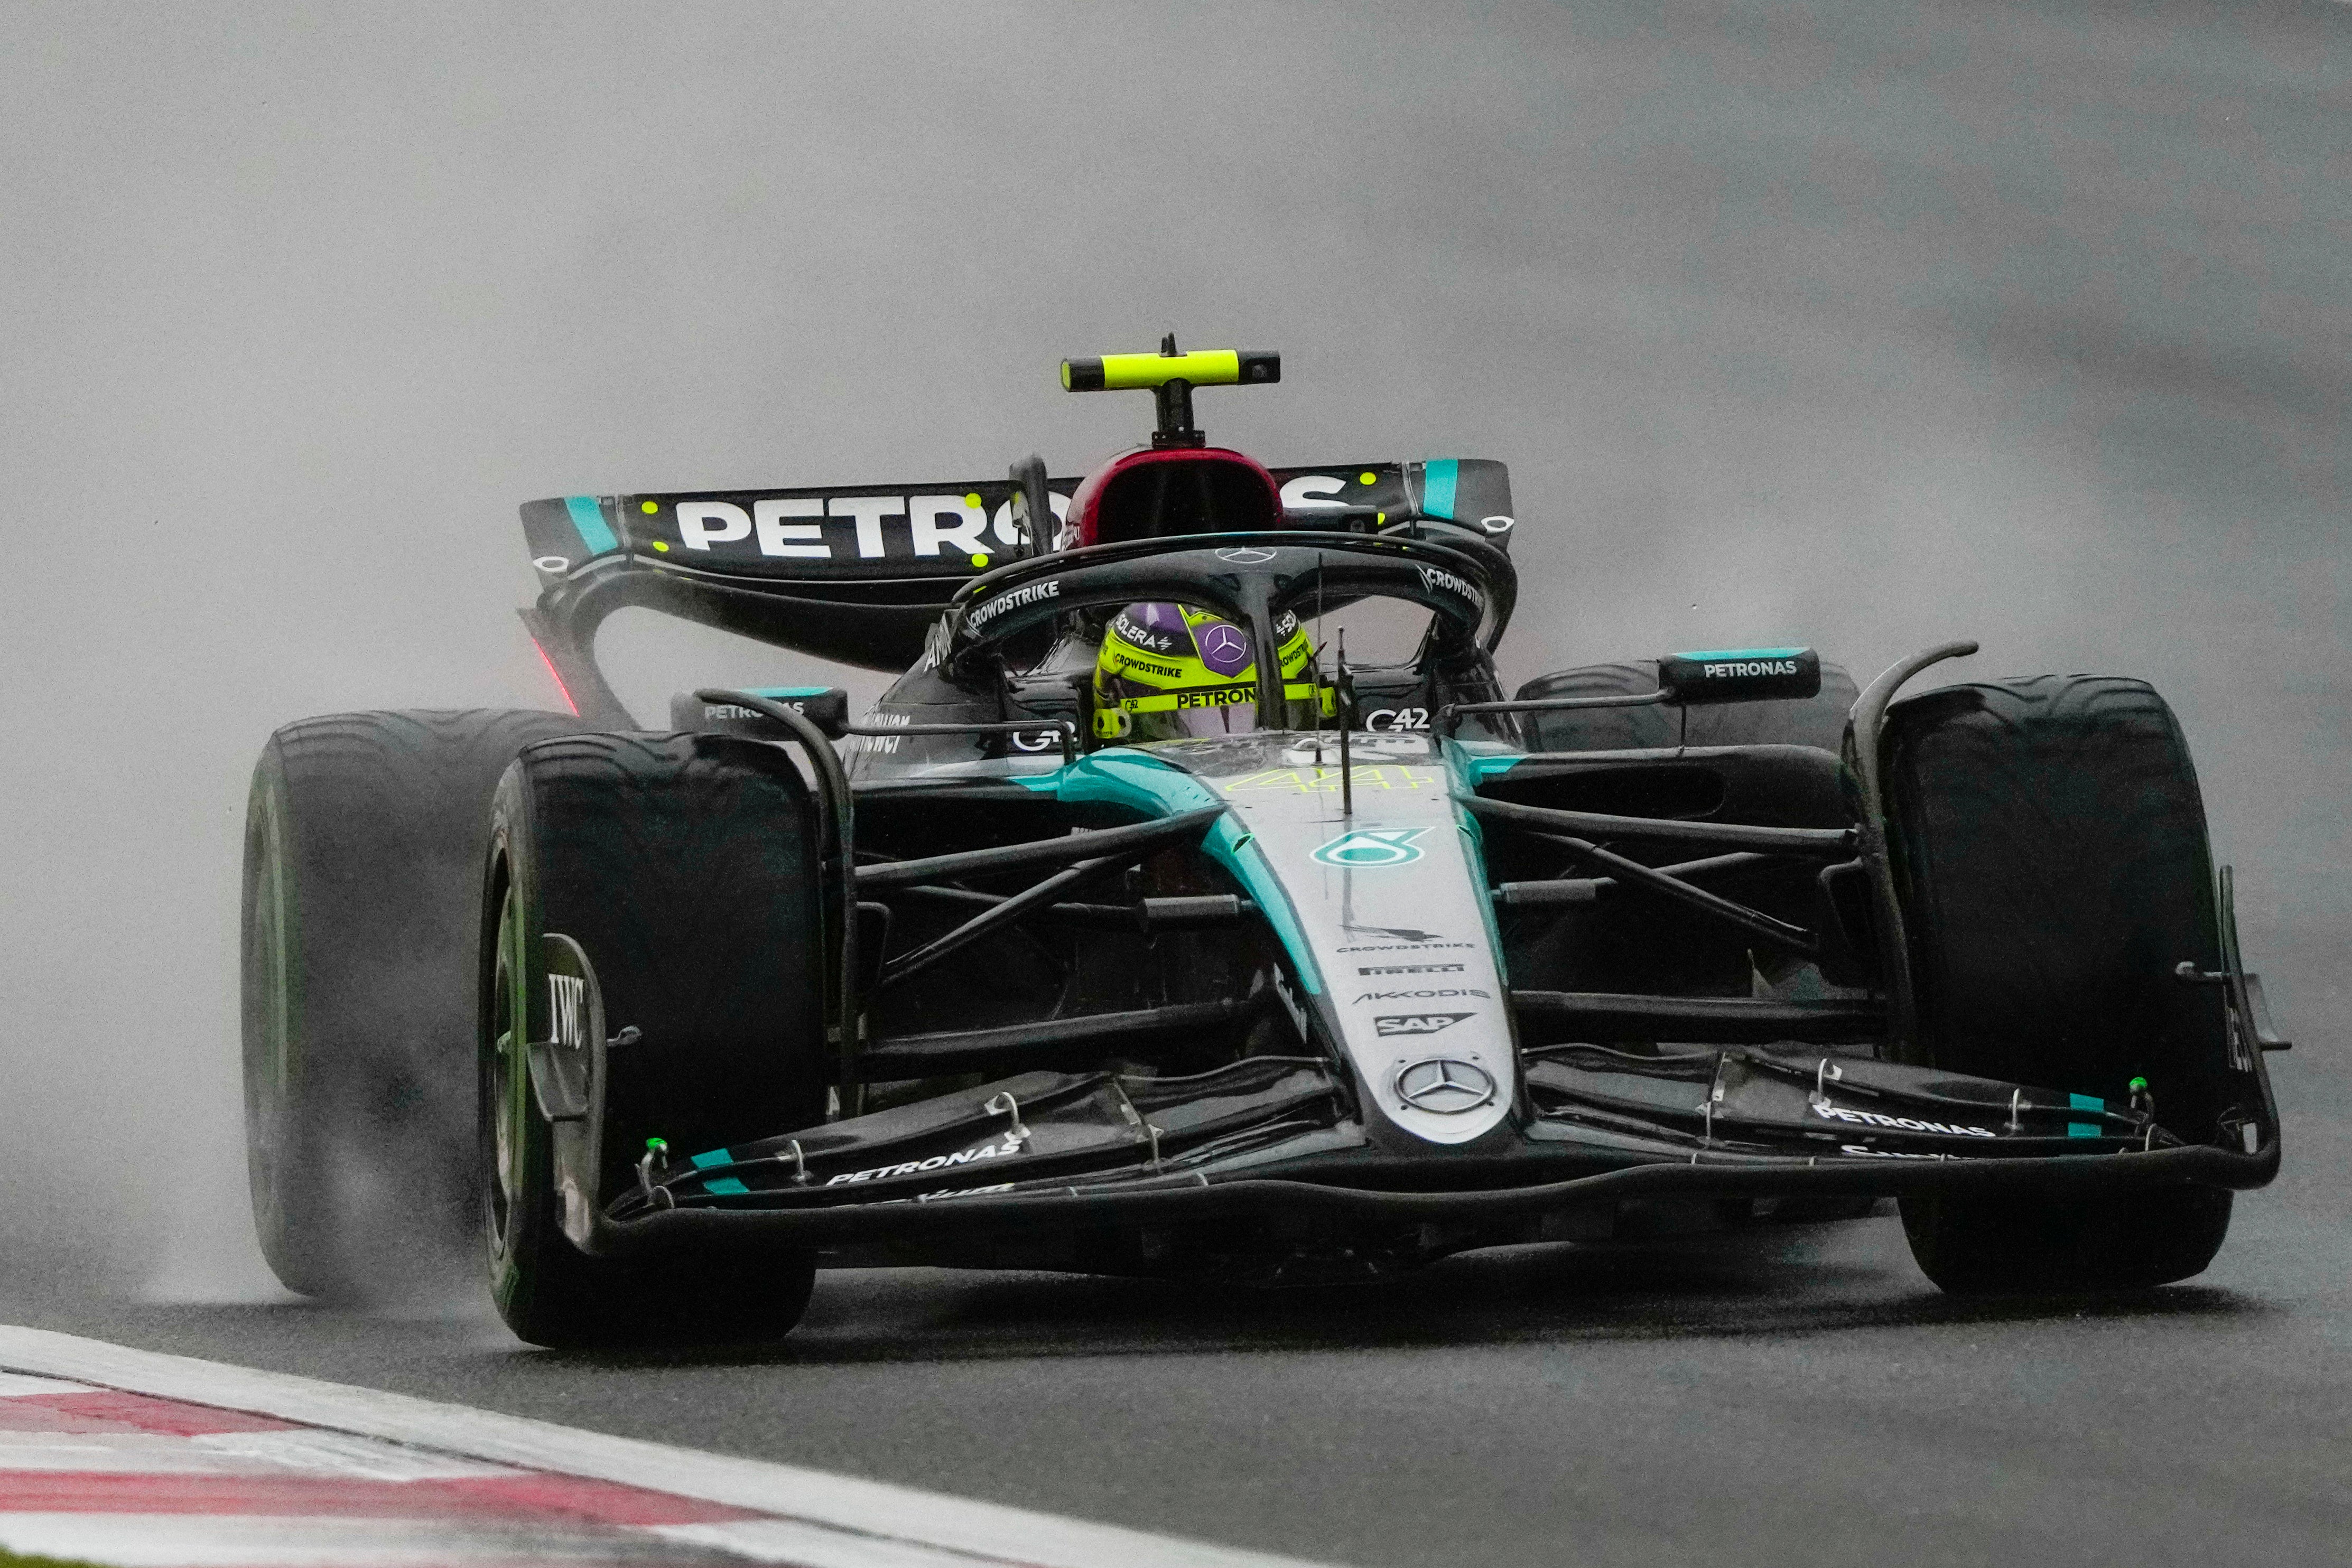 Lewis Hamilton took advantage of the rainy conditions to finish on the front row alongside Norris